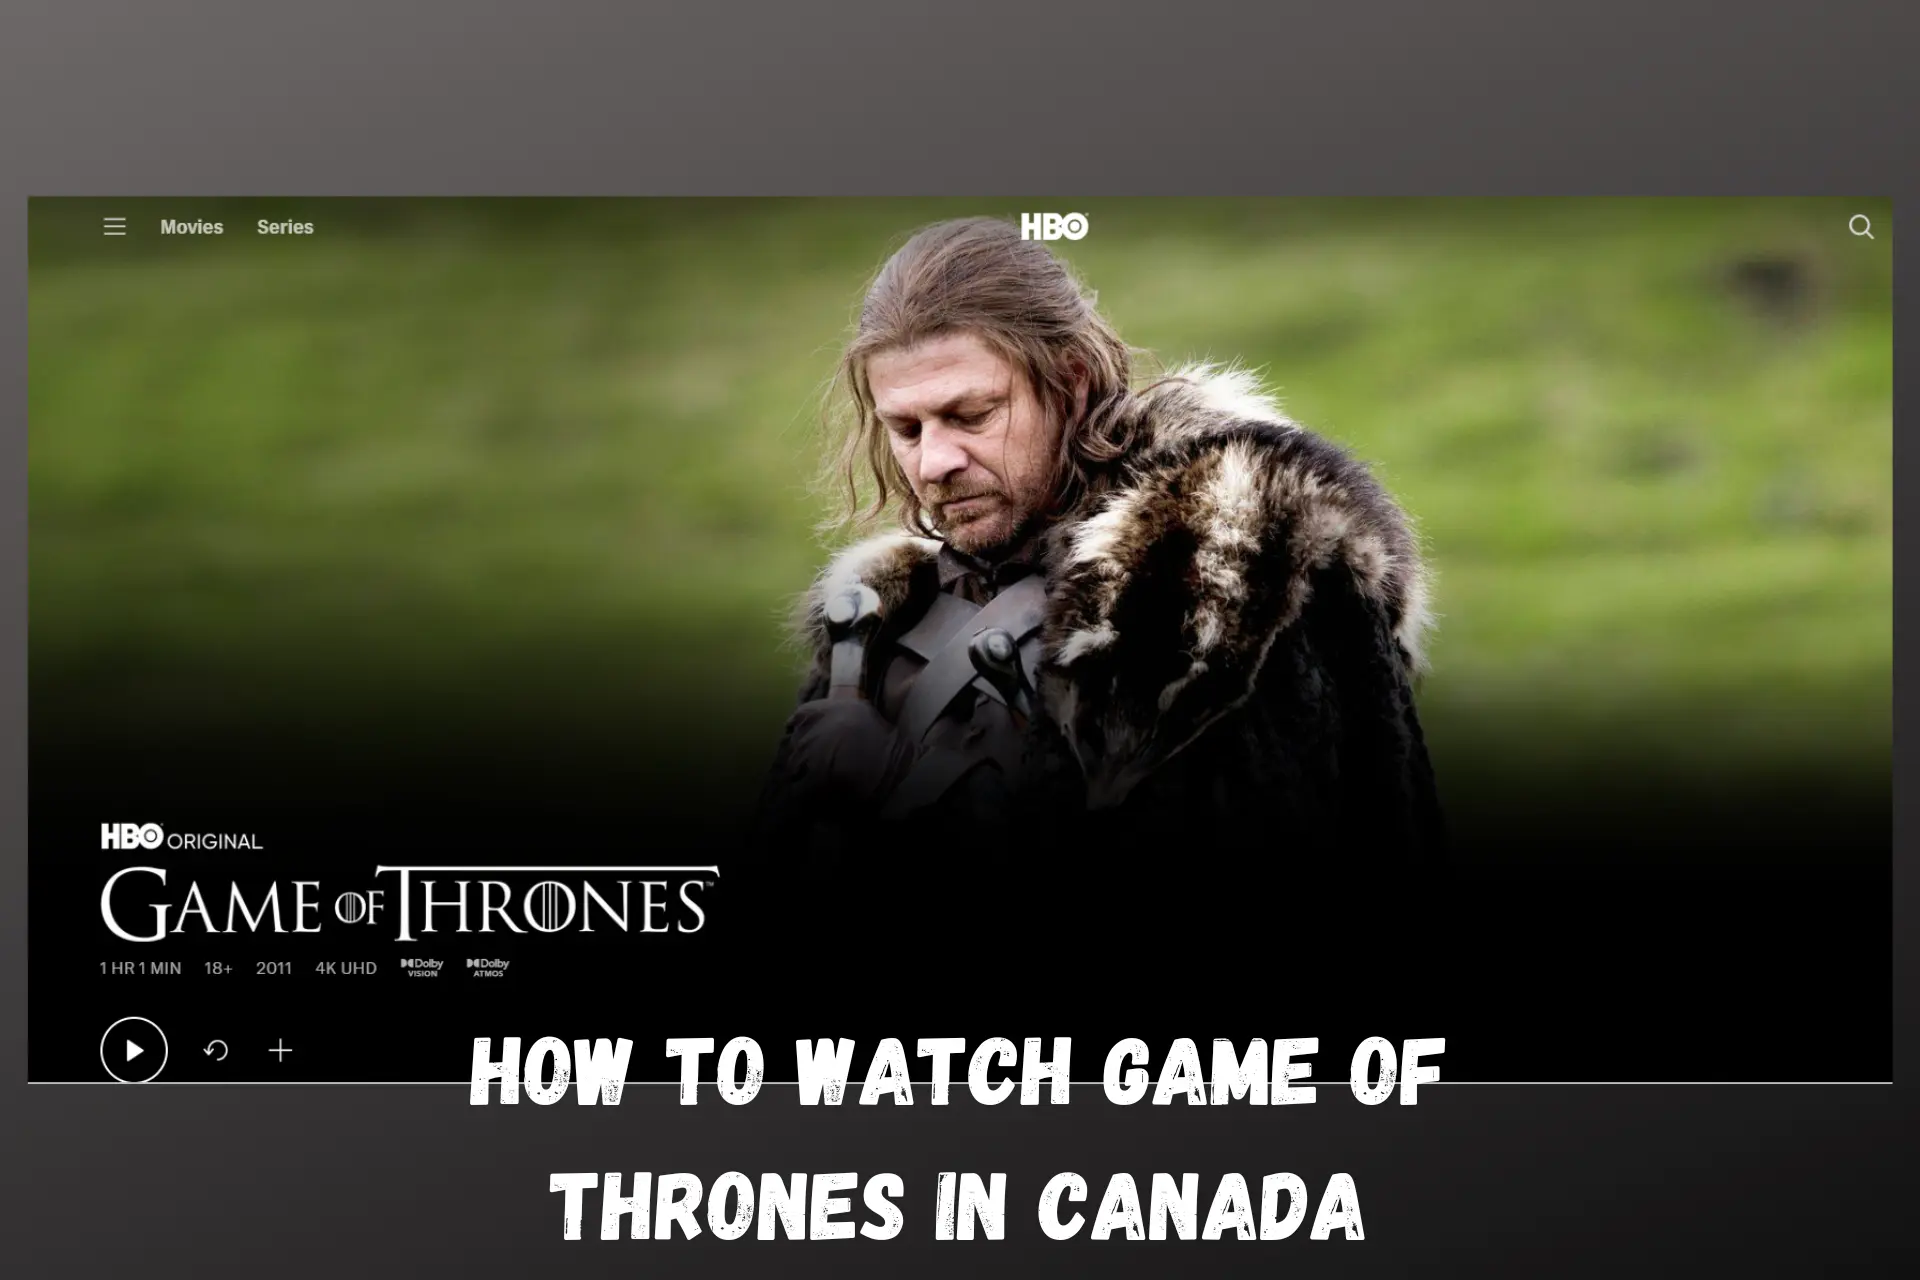 HOW TO WATCH GAME OF THRONES IN CANADA